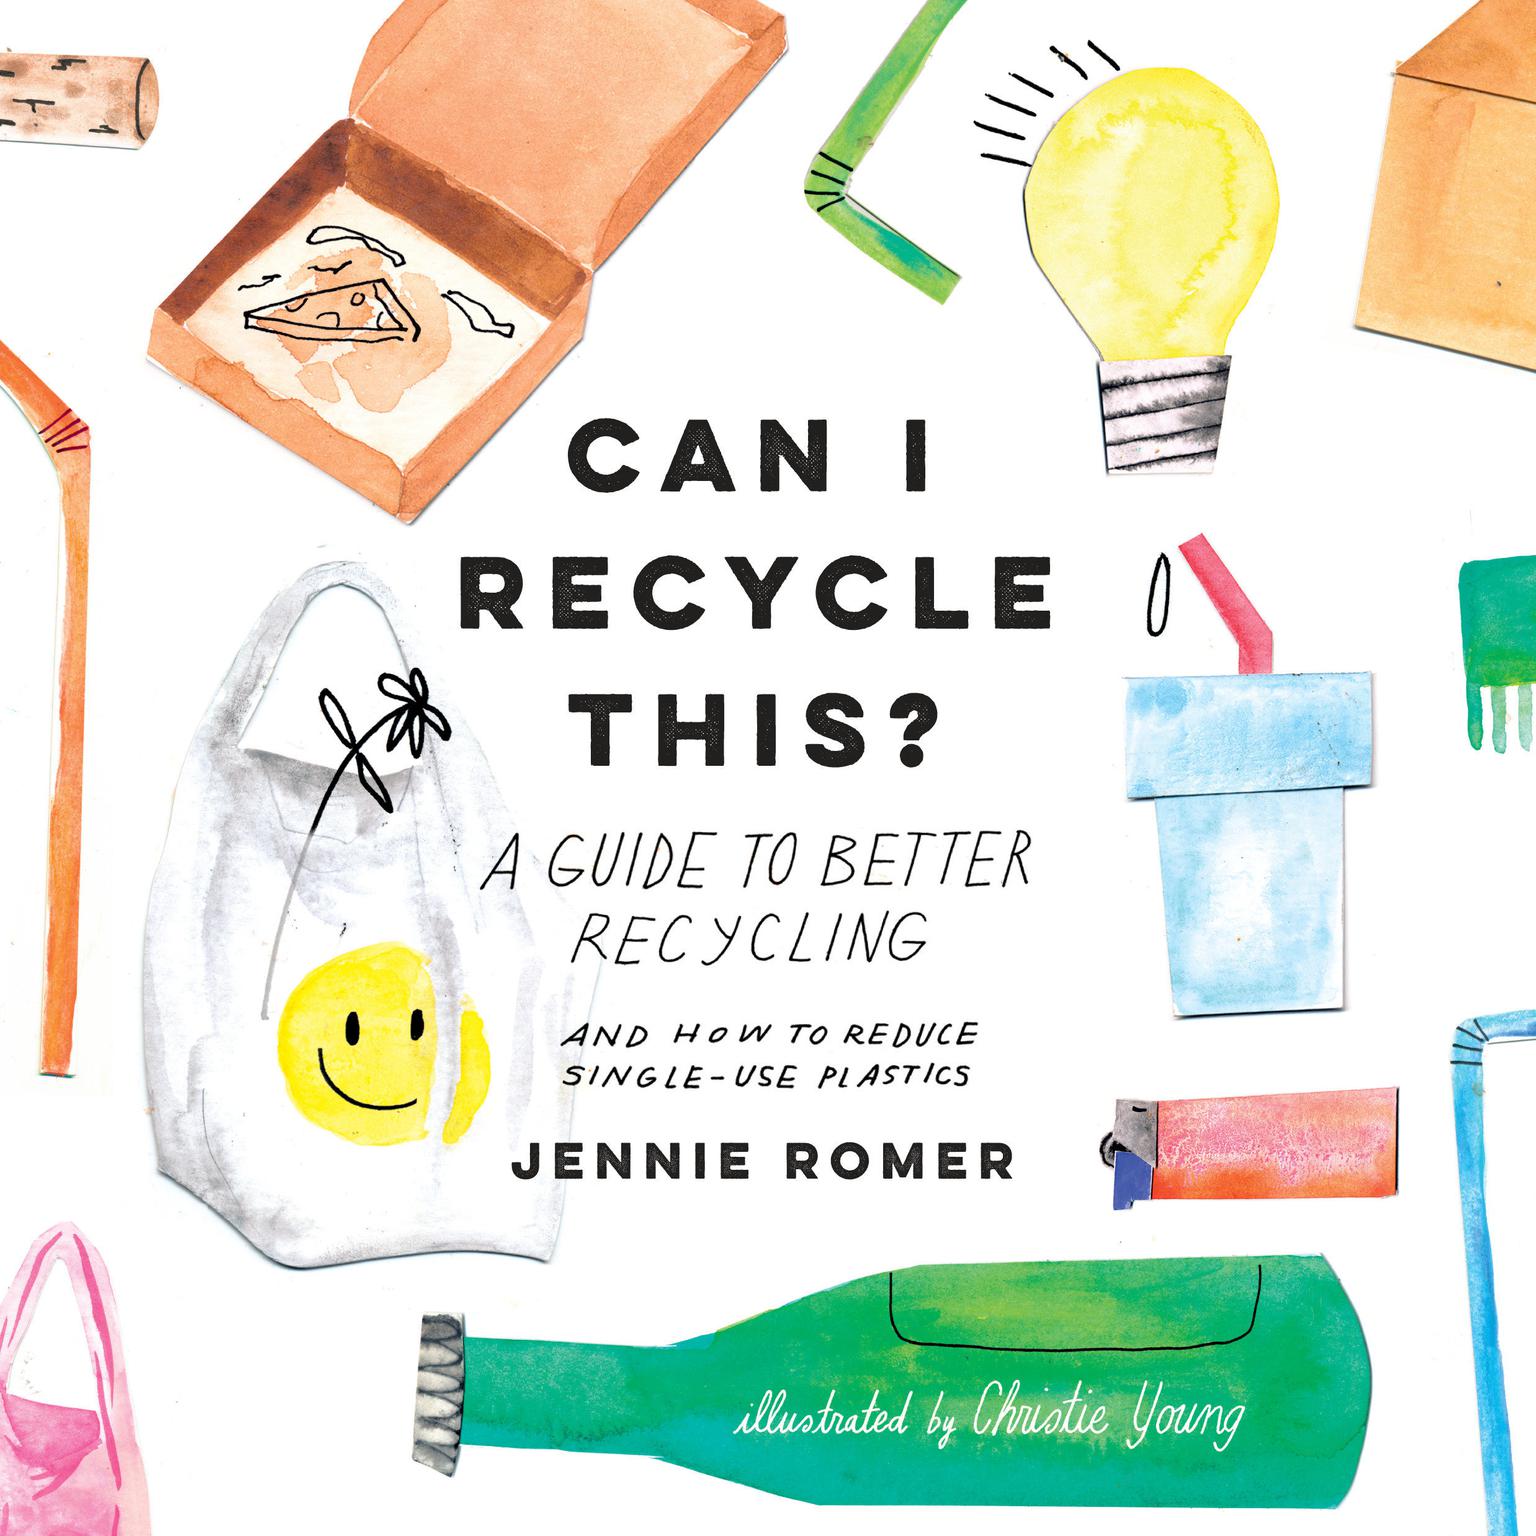 Can I Recycle This?: A Guide to Better Recycling and How to Reduce Single-Use Plastics Audiobook, by Jennie Romer